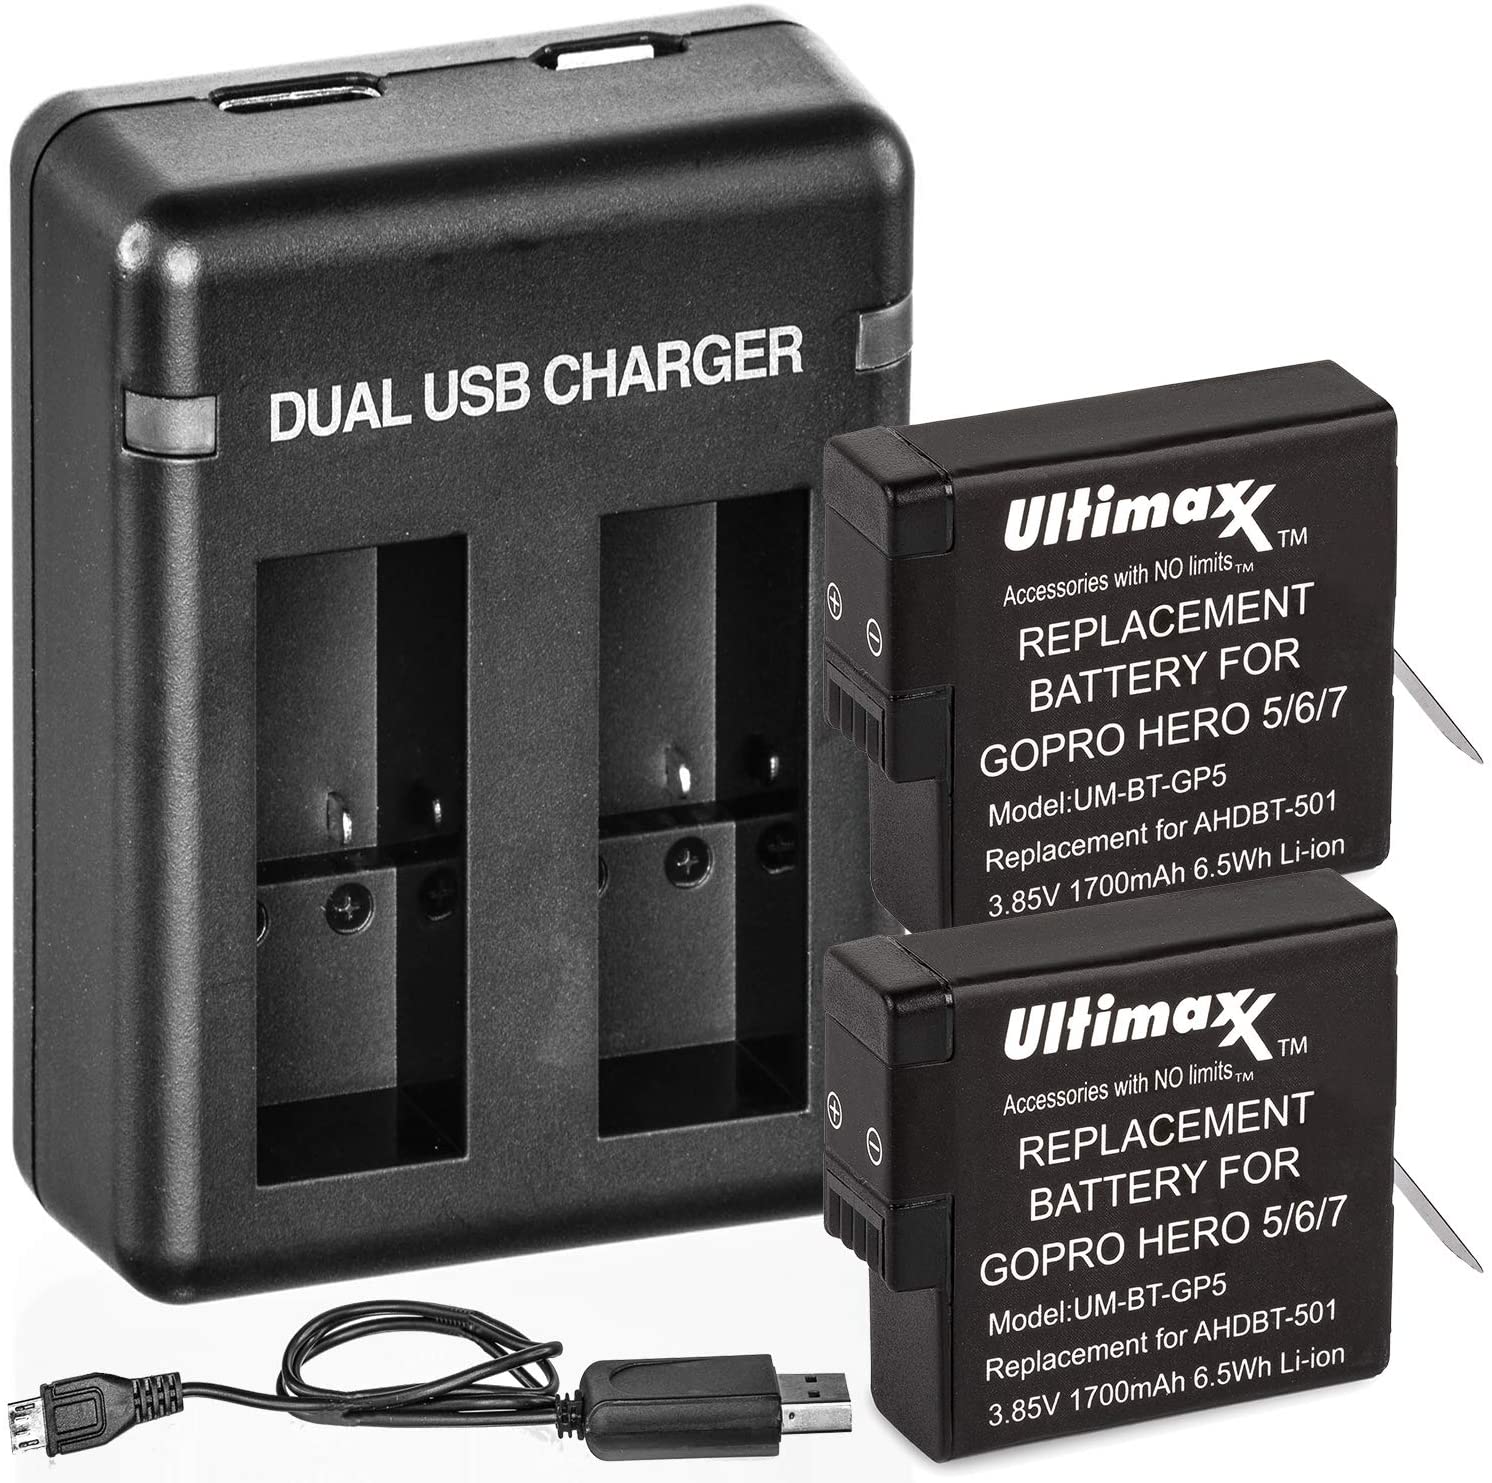 Ultimaxx Dual USB Battery Charger for GoPro Hero 5, 6, 7, 8 Batteries with 2X Extended Life Replacement Batteries (1700mAh / 3.85V / 6.5Wh) for Use with GoPro HERO5, HERO6, HERO7 & HERO8 Action Cams - image 1 of 7